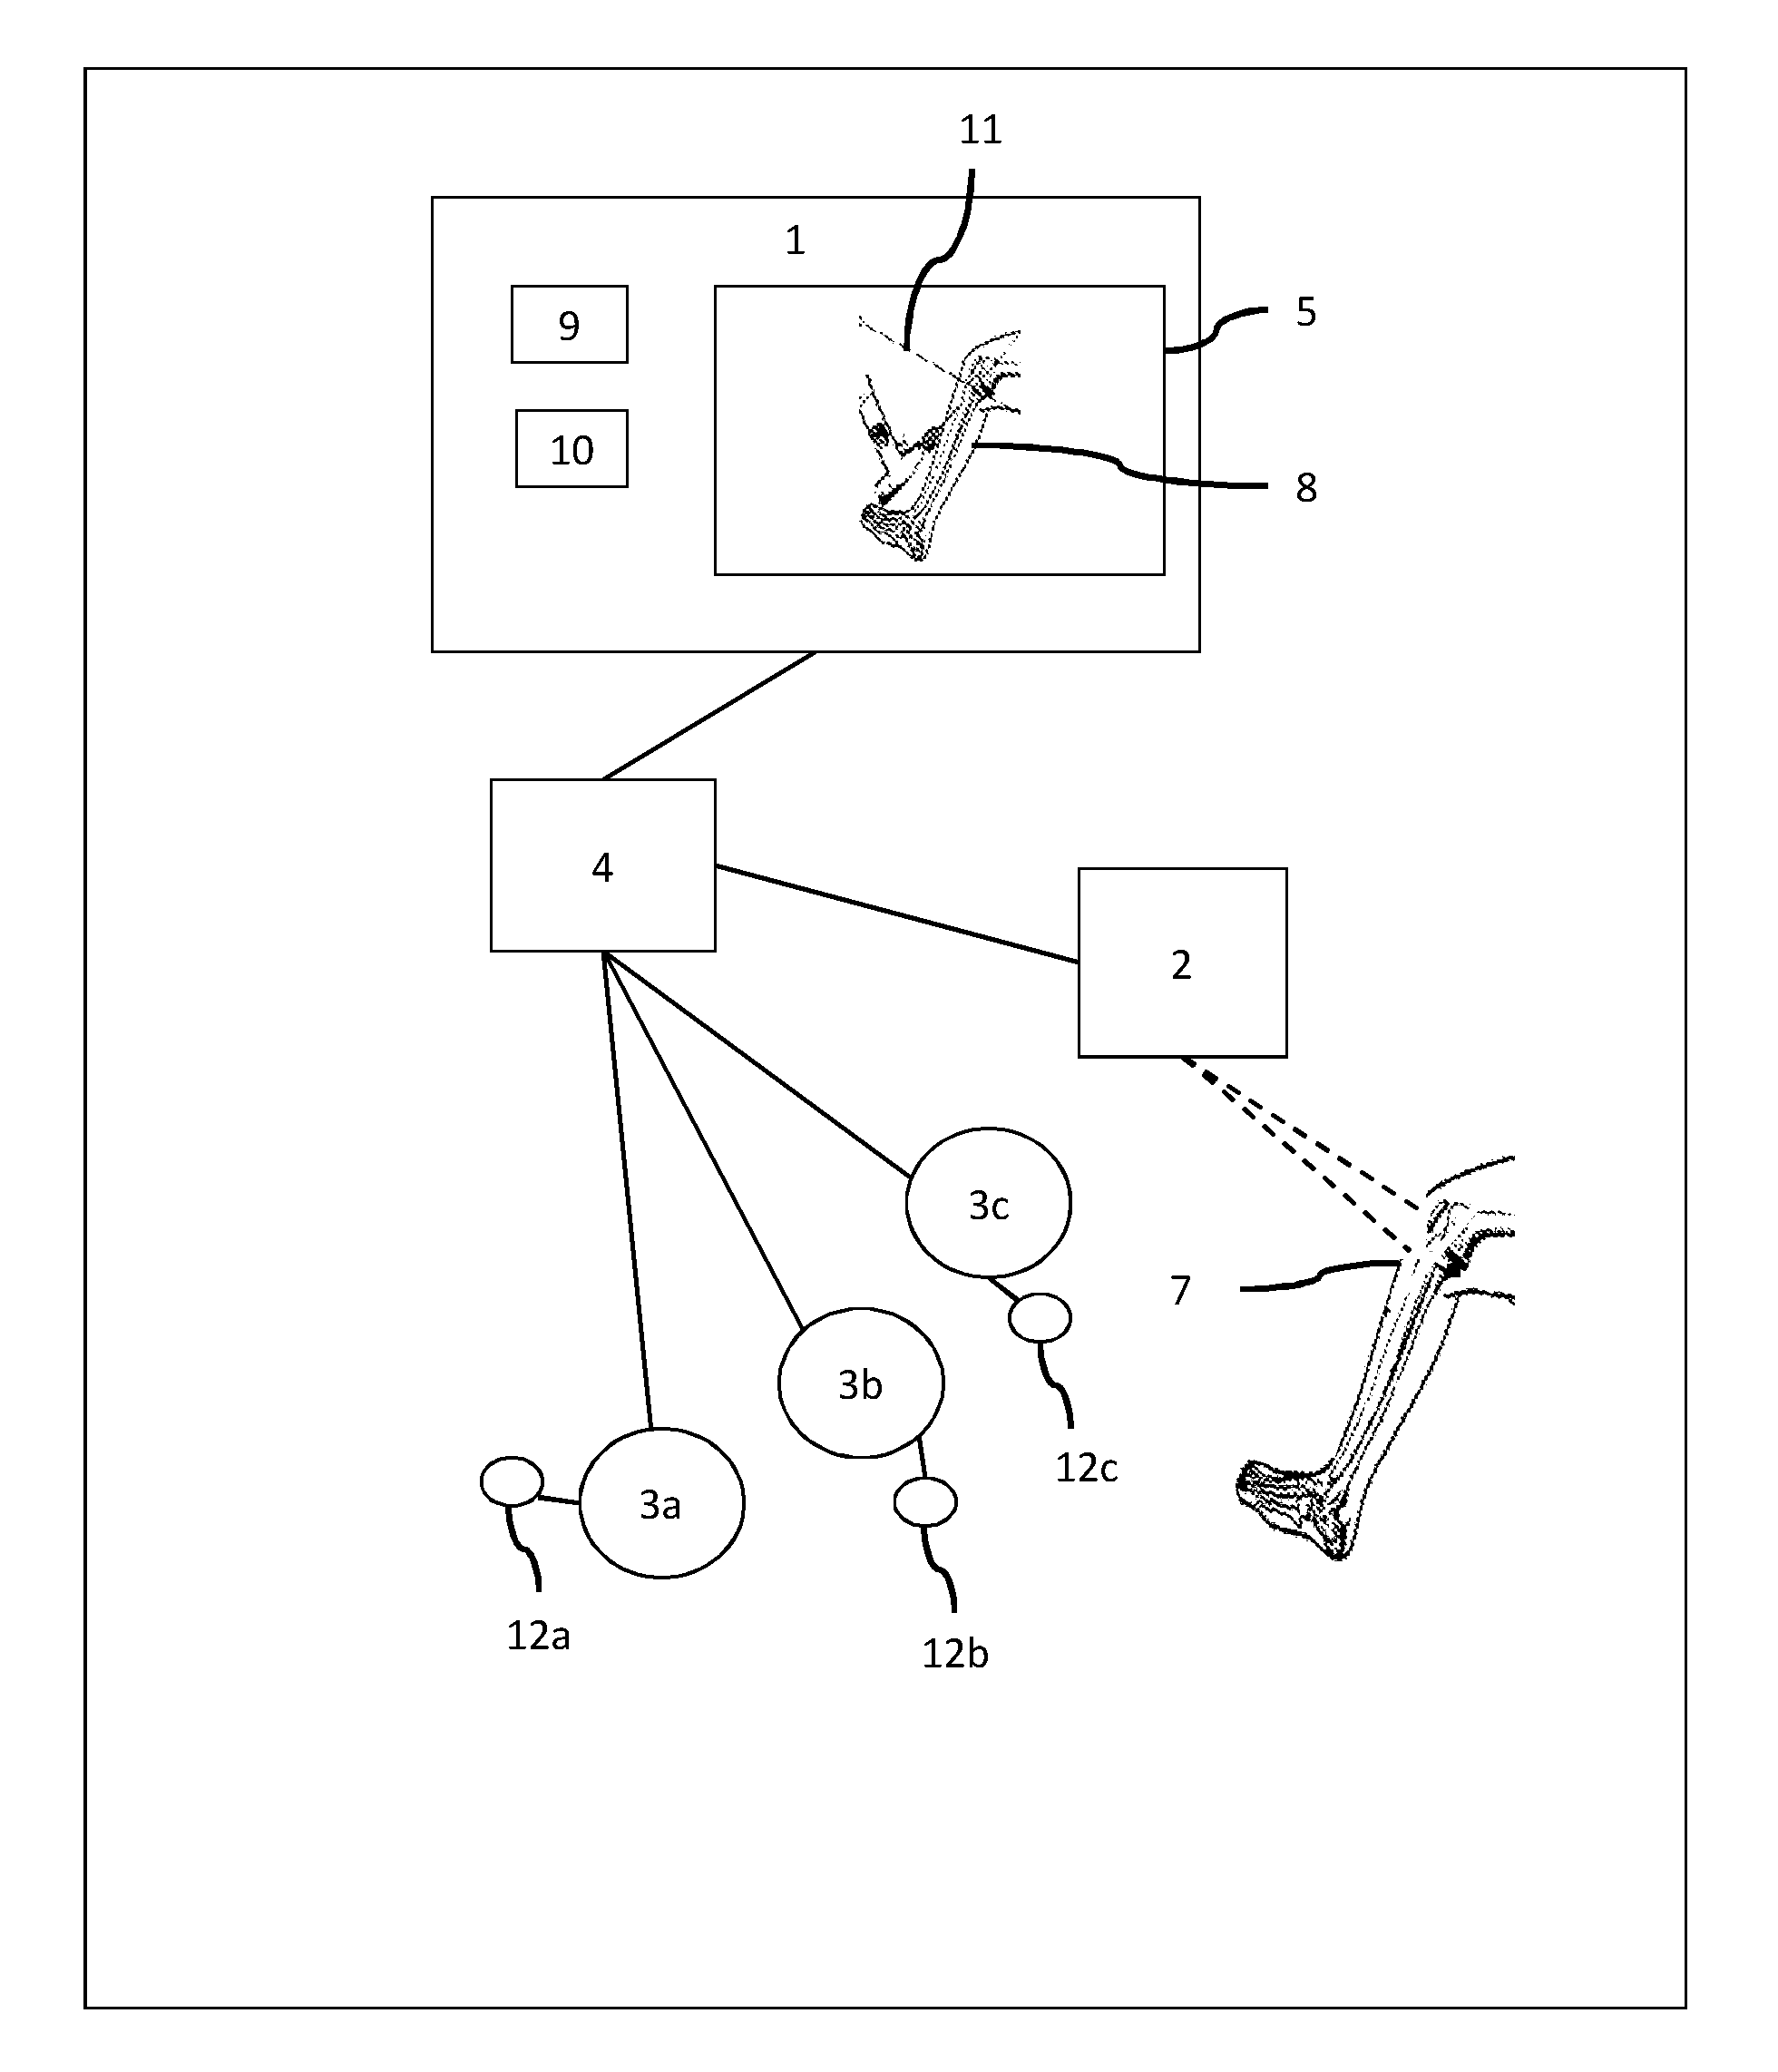 Method and System for Computer Assisted Surgery